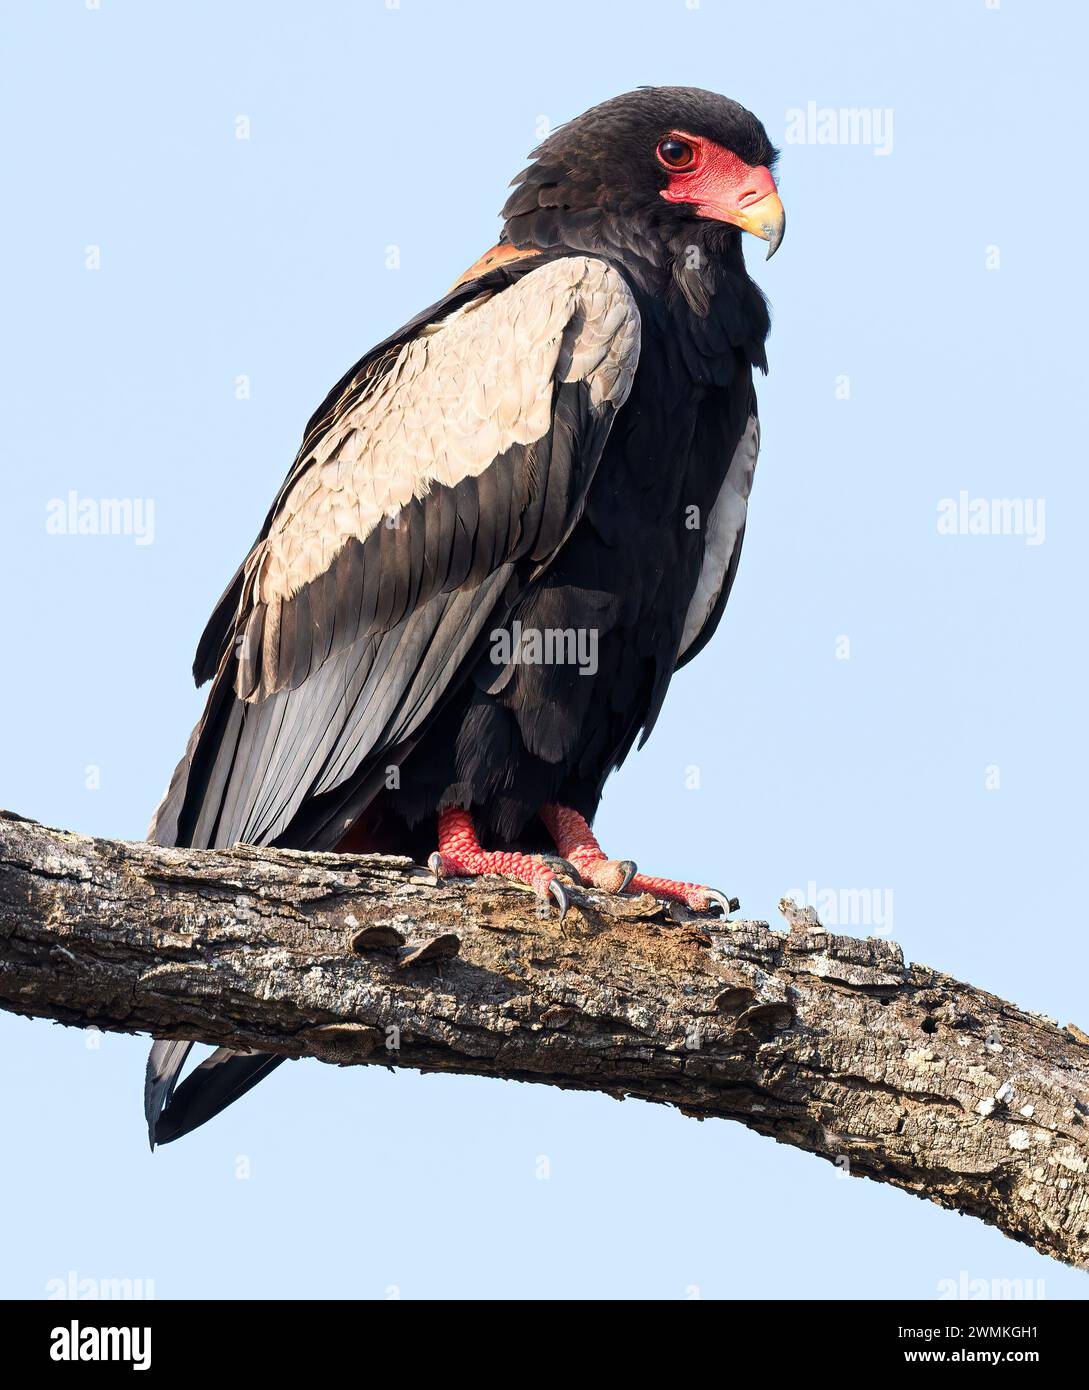 Bateleur Eagle perched on thick branch with blue background Stock Photo